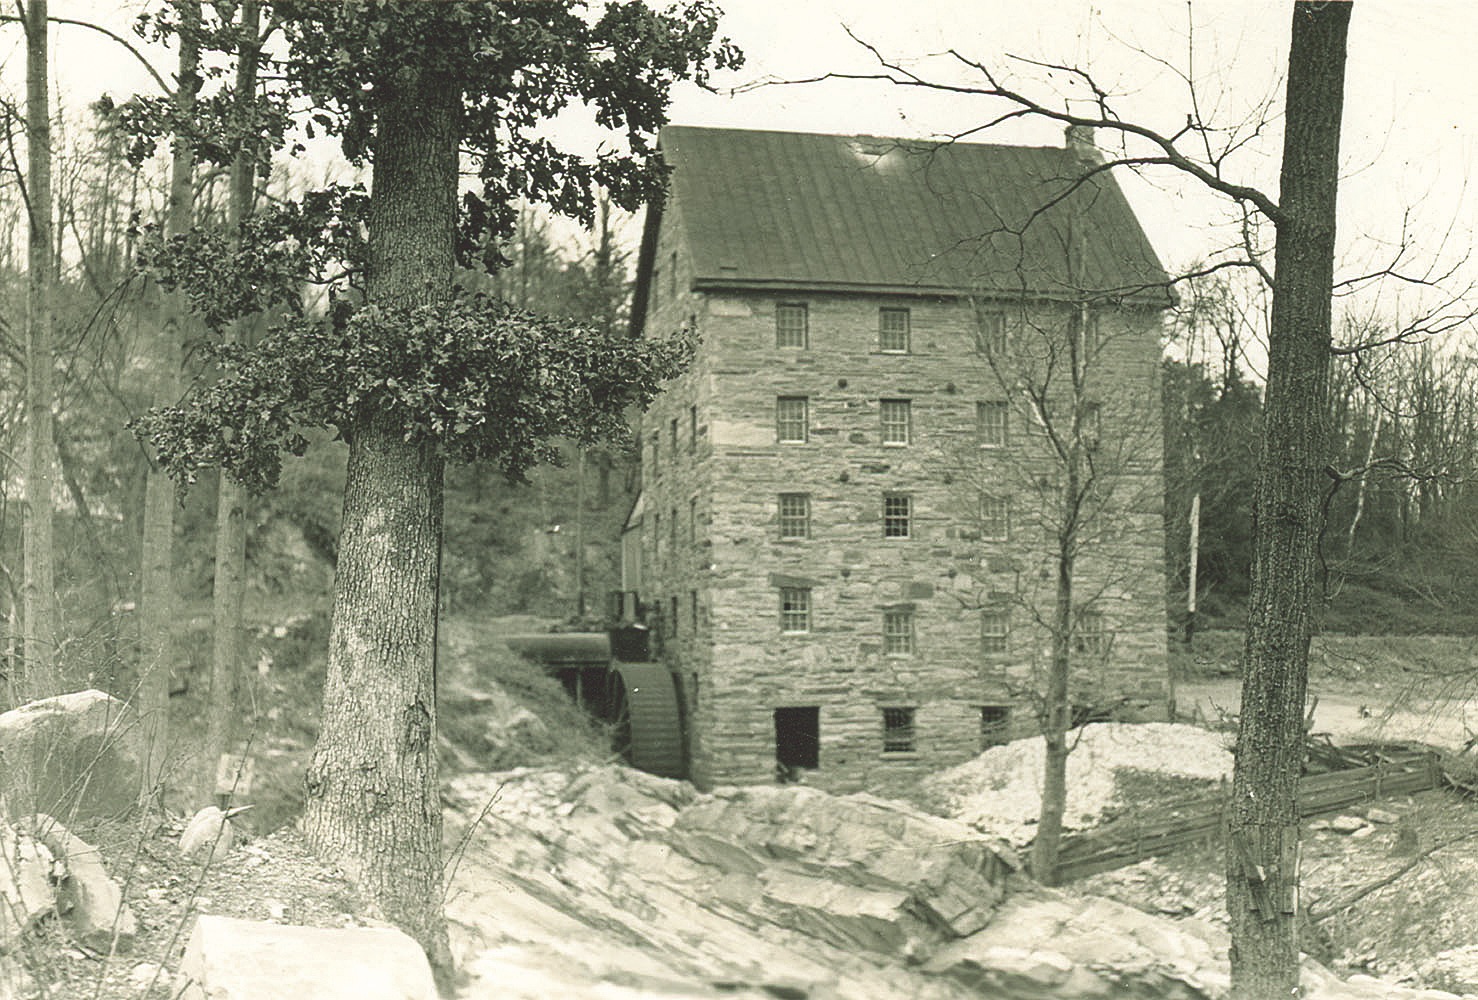 Chapman’s Mill (shown here in the 1930s) was the scene of the heaviest fighting. (National Park Service)